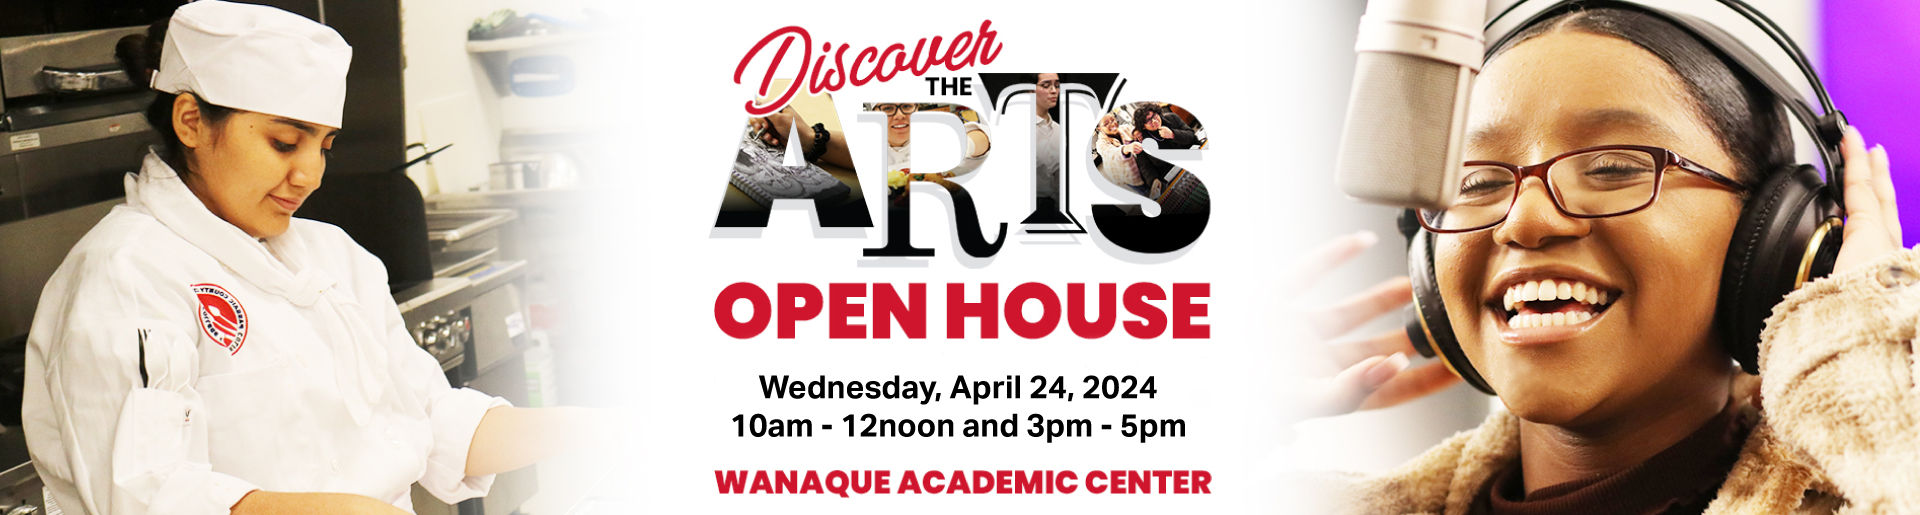 Discover the Arts Open House. Wed, April 24, 2024 from 10am-noon and 3-5pm